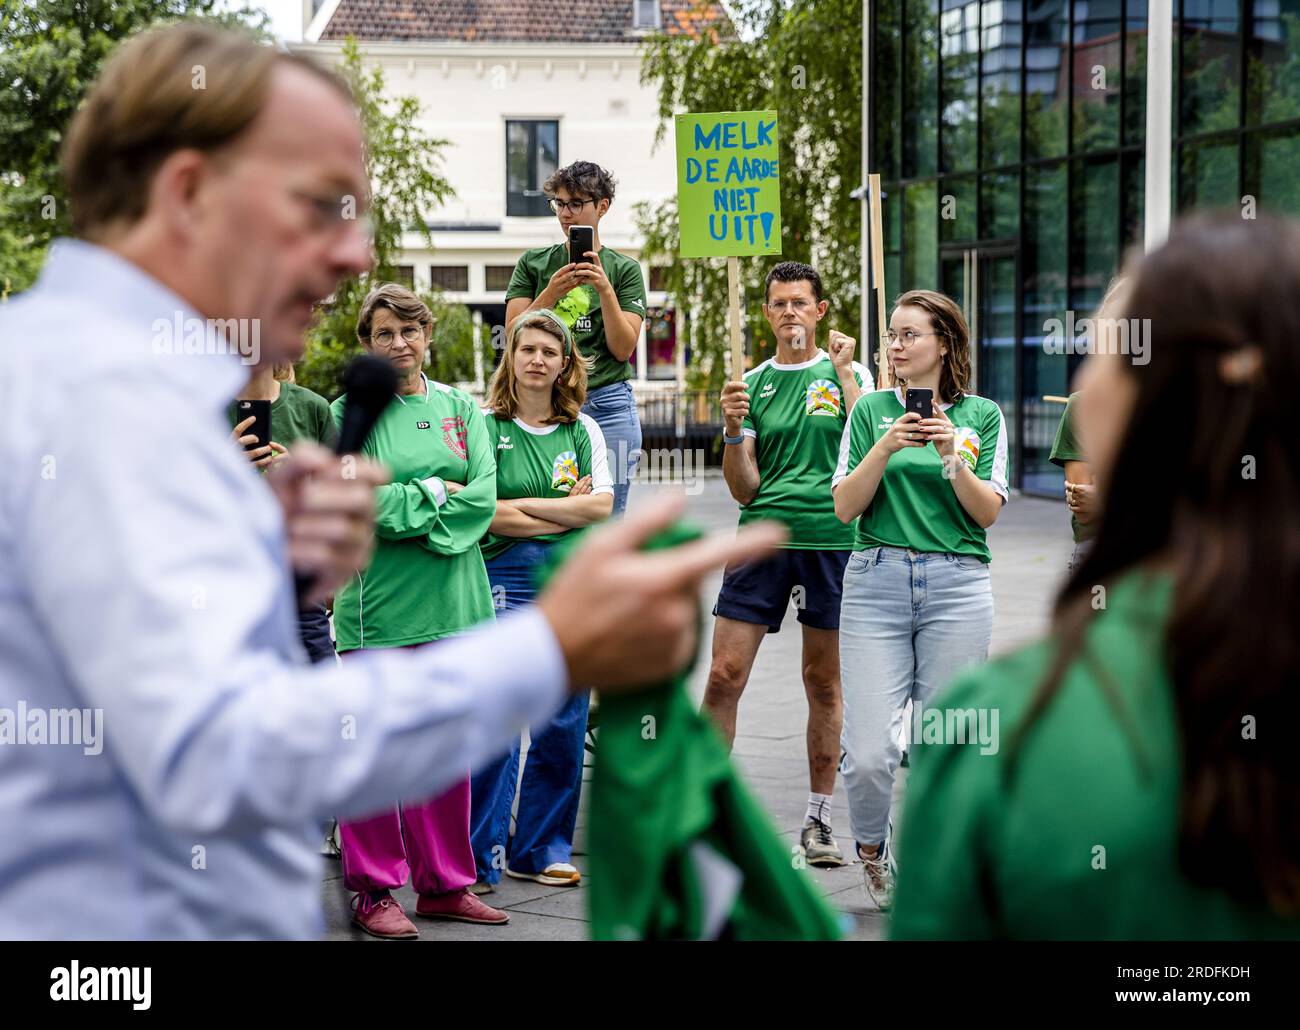 AMERSFOORT - CEO Jan Derck van Karnebeek of FrieslandCampina is talking to demonstrators from Milieudefensie Jong in front of the dairy company's head office. The youth organization wants an answer to the question of whether FrieslandCampina intends to reduce its CO2 emissions in line with the Paris Climate Agreement. ANP SEM VAN DER WAL netherlands out - belgium out Stock Photo